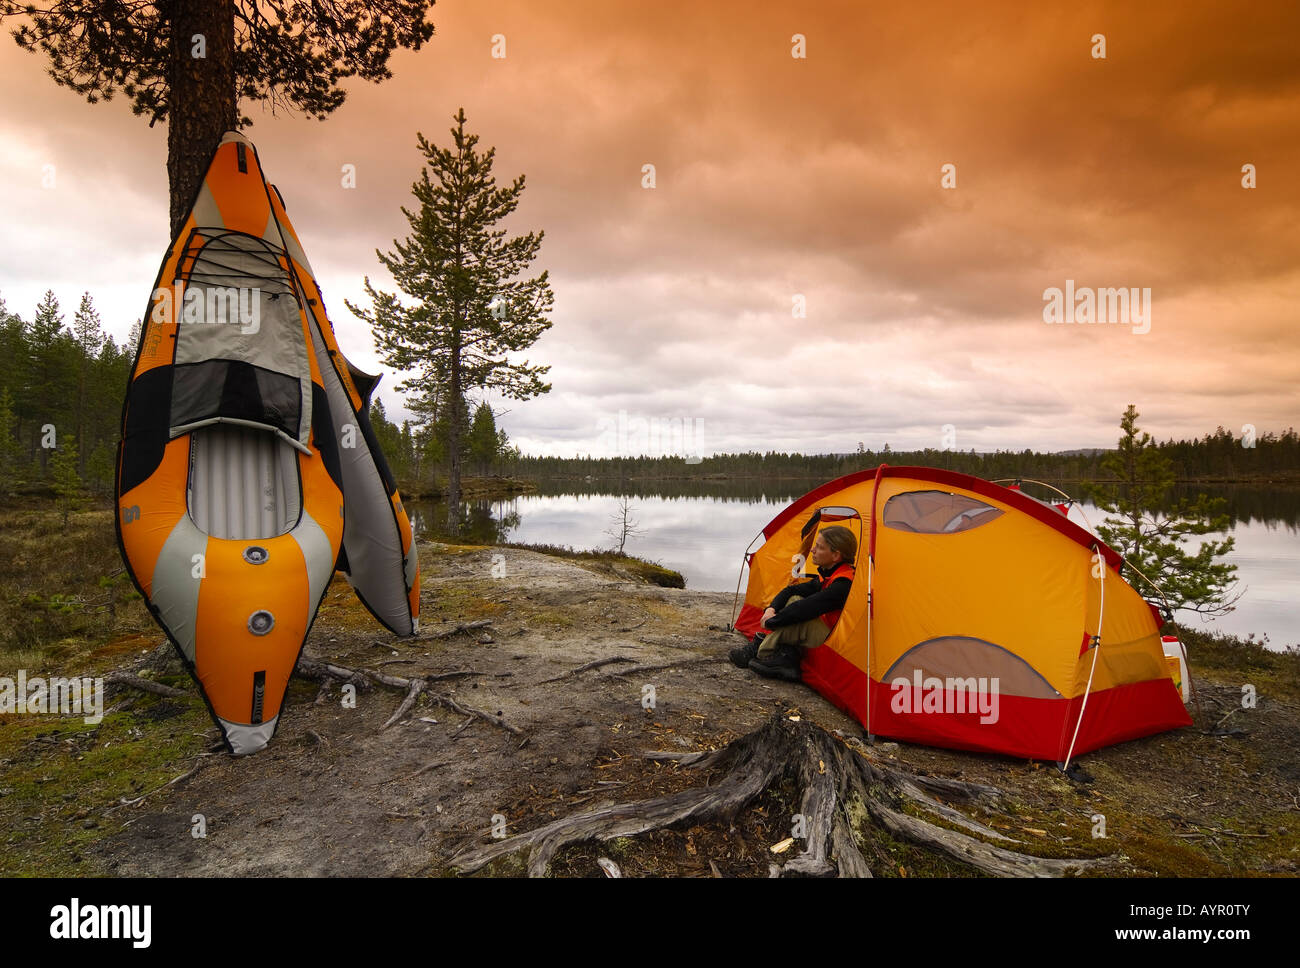 https://c8.alamy.com/comp/AYR0TY/two-inflatable-kayaks-and-a-woman-sitting-in-front-of-a-tent-at-the-AYR0TY.jpg